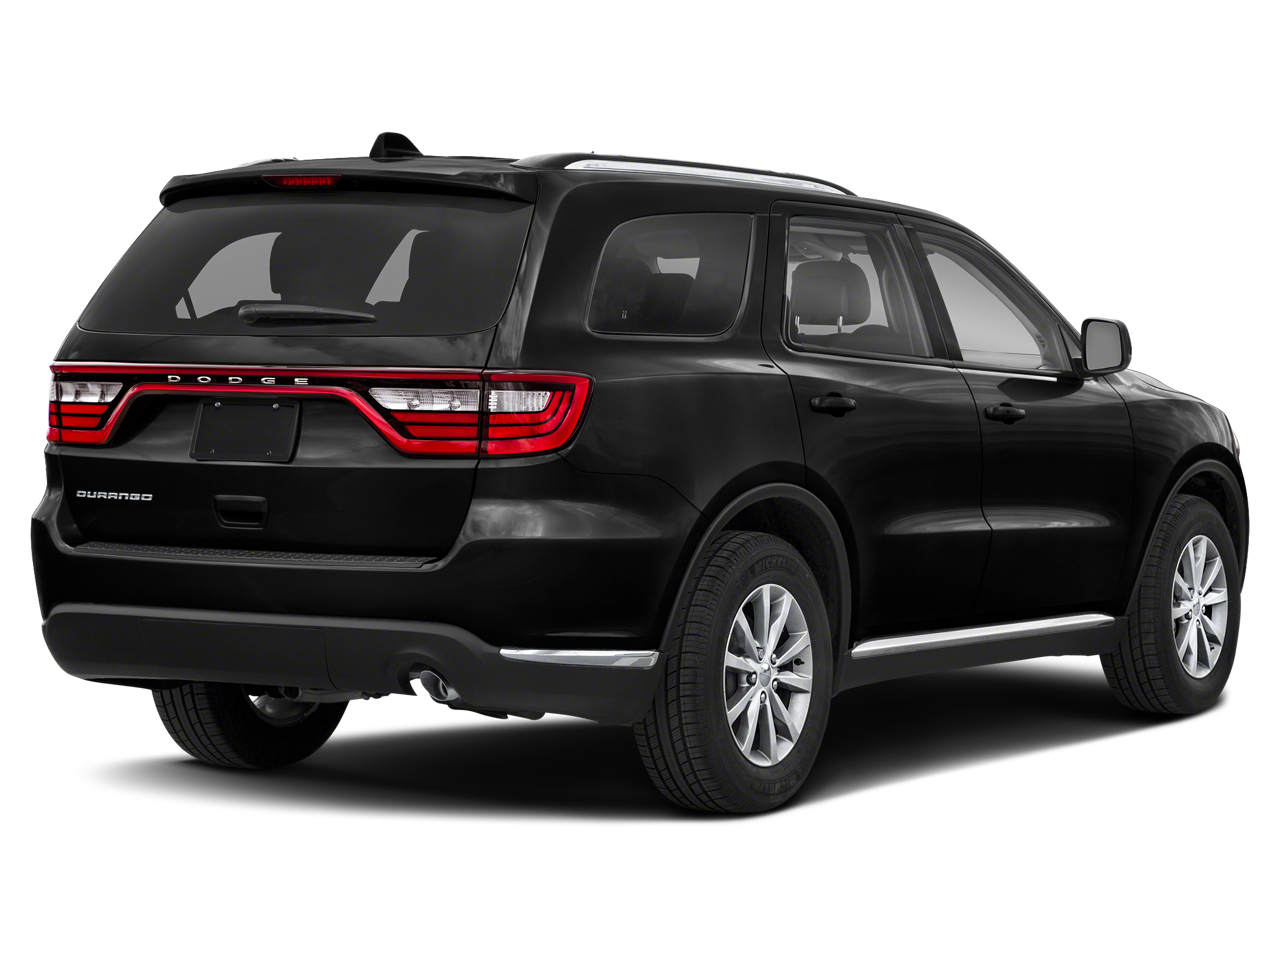 2019 Dodge Durango GT Plus AWD 4 New Tires Heated Black Leather Heated Rear Seats Power Liftgate 20 Inch Wheels